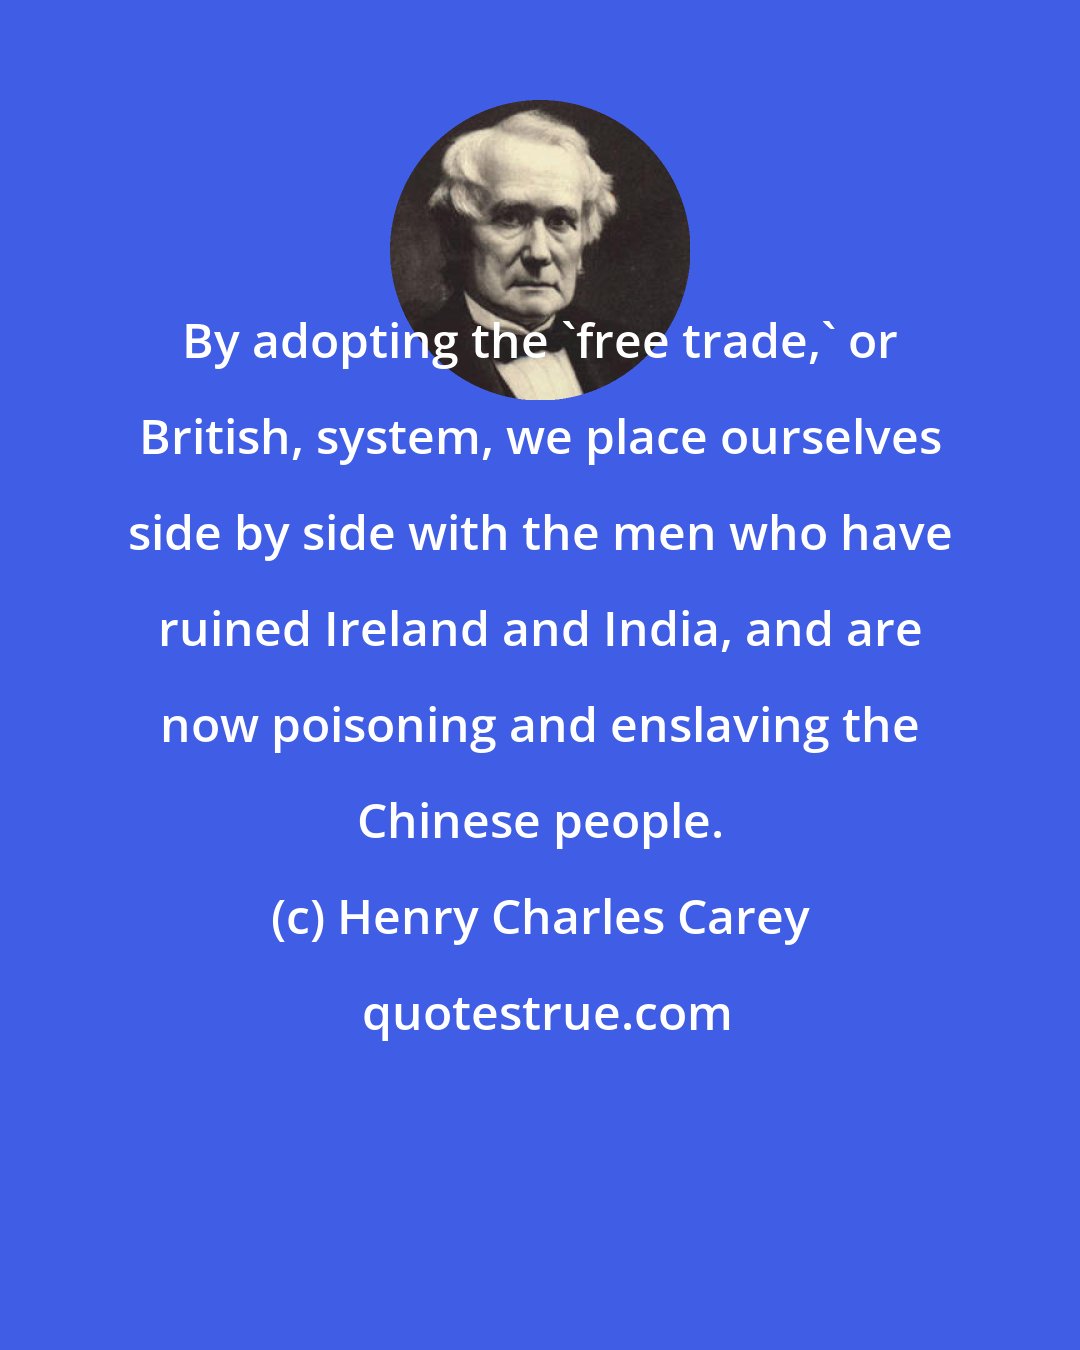 Henry Charles Carey: By adopting the 'free trade,' or British, system, we place ourselves side by side with the men who have ruined Ireland and India, and are now poisoning and enslaving the Chinese people.